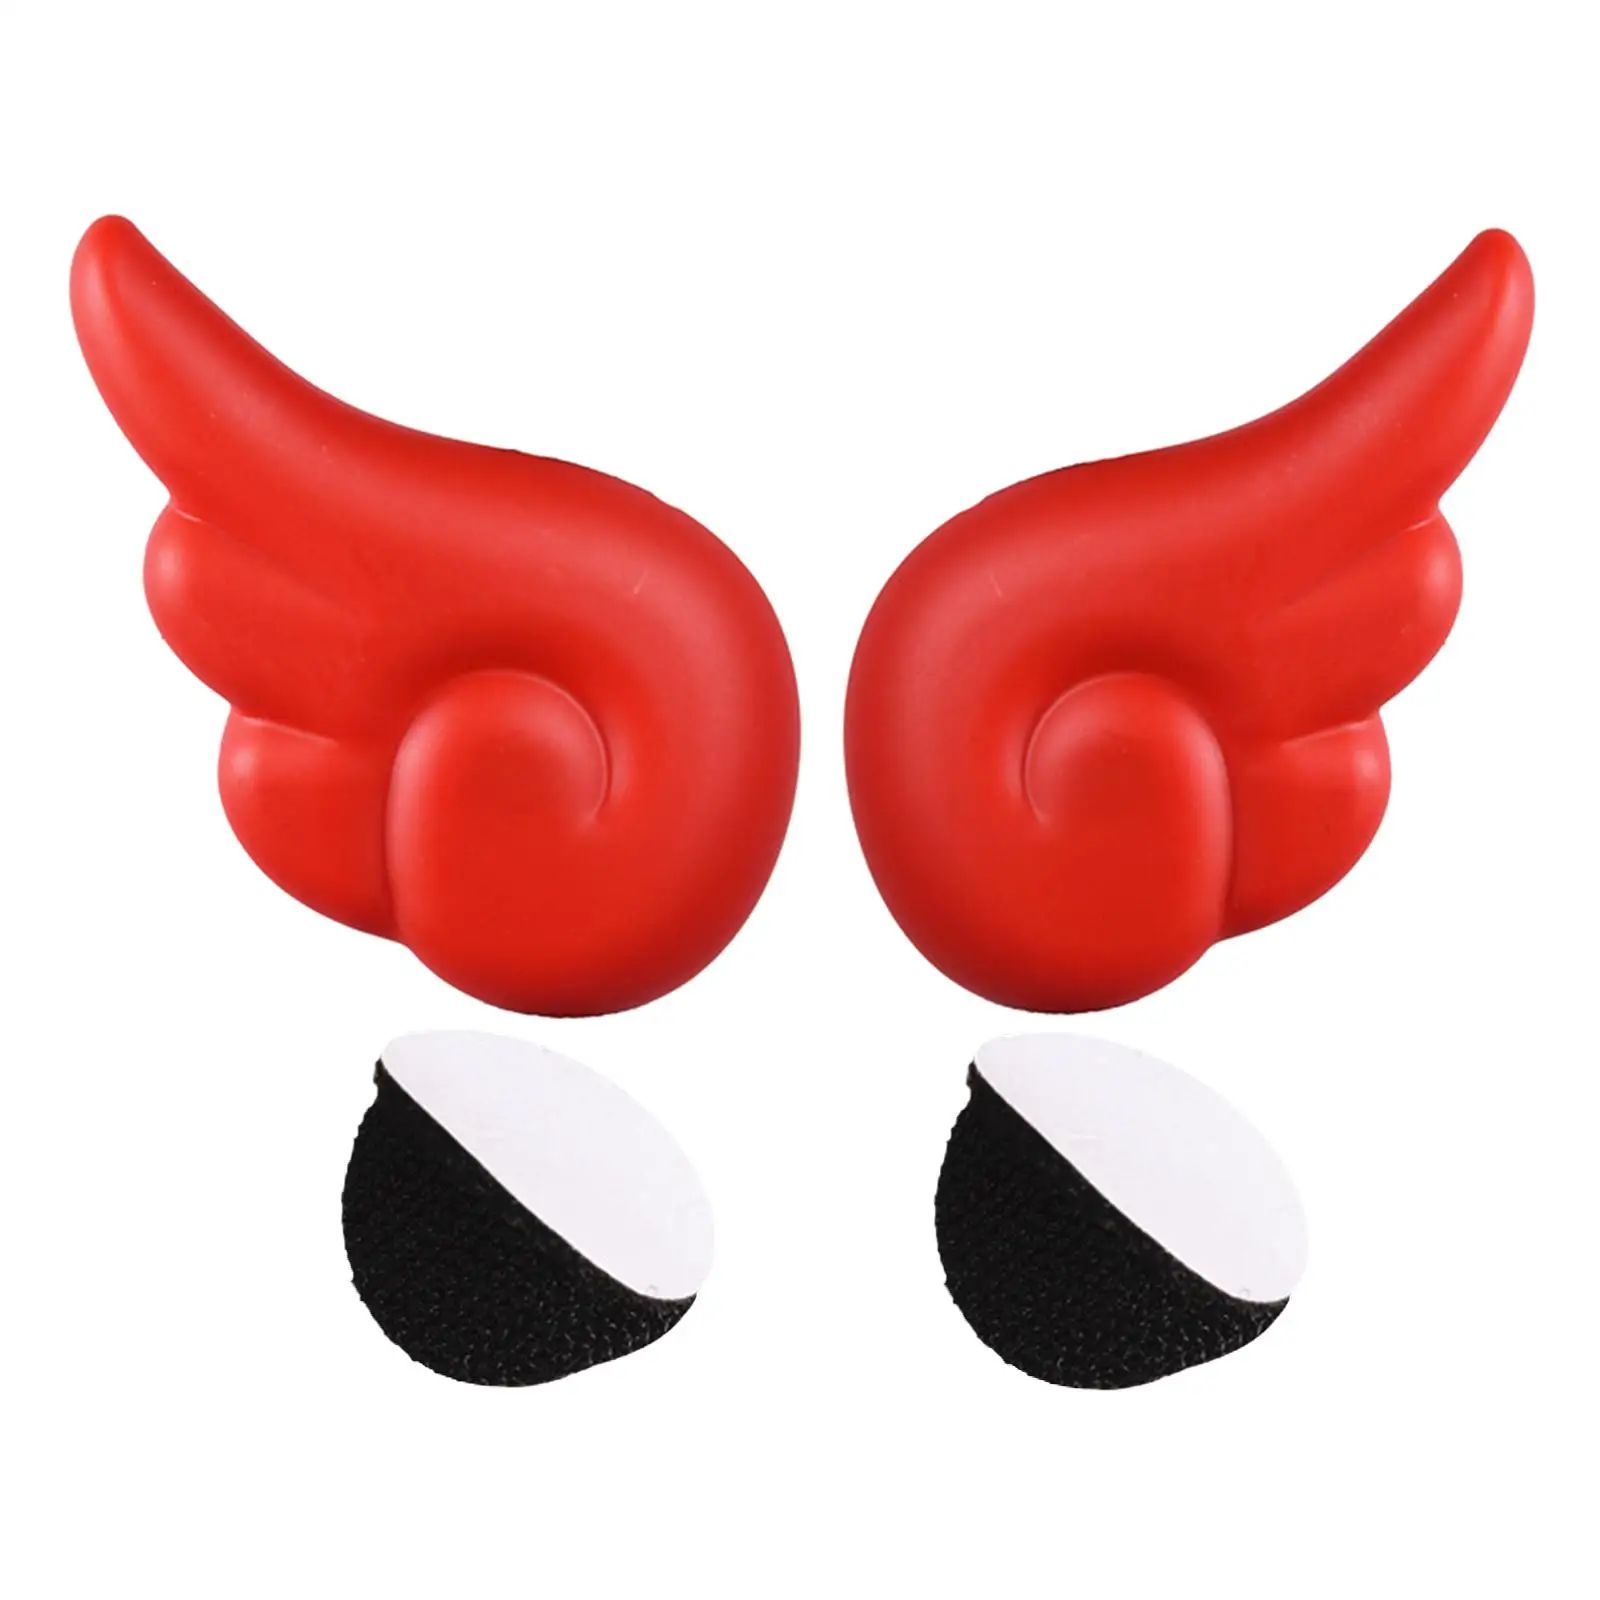 2x Helmet Angel Wing Easy Peel and Stick Universal Fit for Scooter Helmet